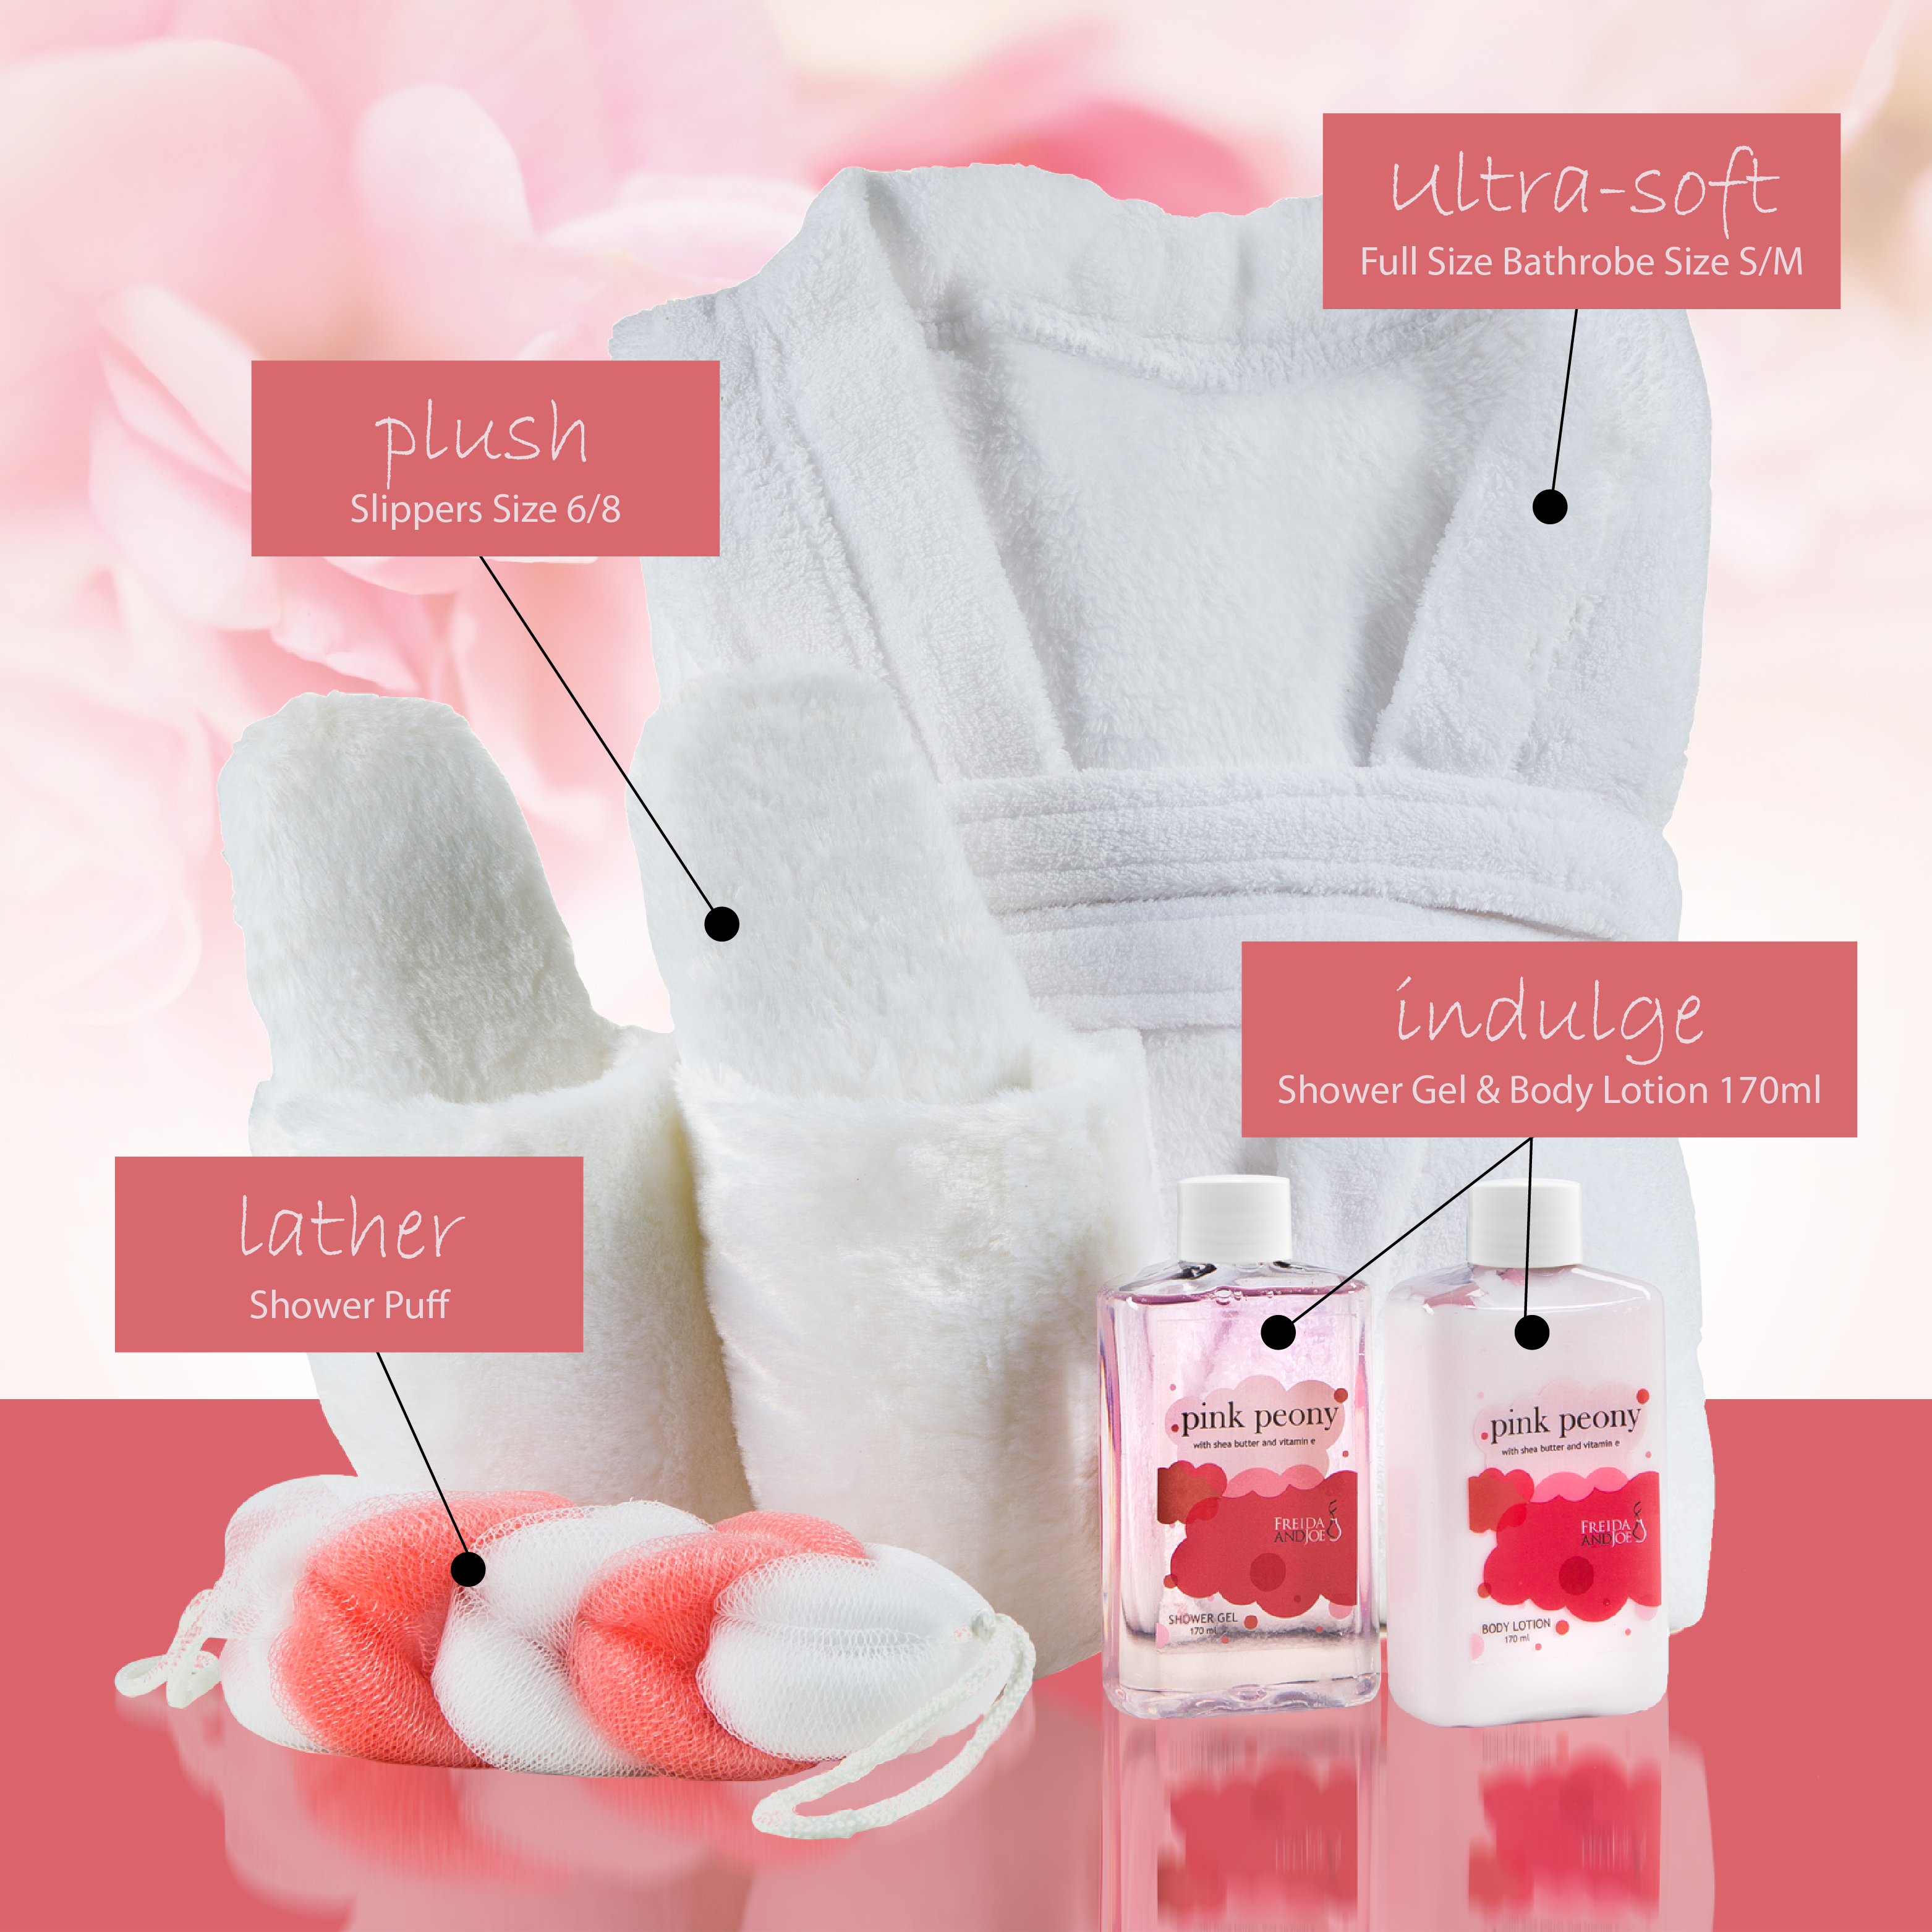 Freida & Joe Gift for Her Pink Peony Scent Home Spa Gift Basket with Luxury Bathrobe & Slipper for Women - image 4 of 5